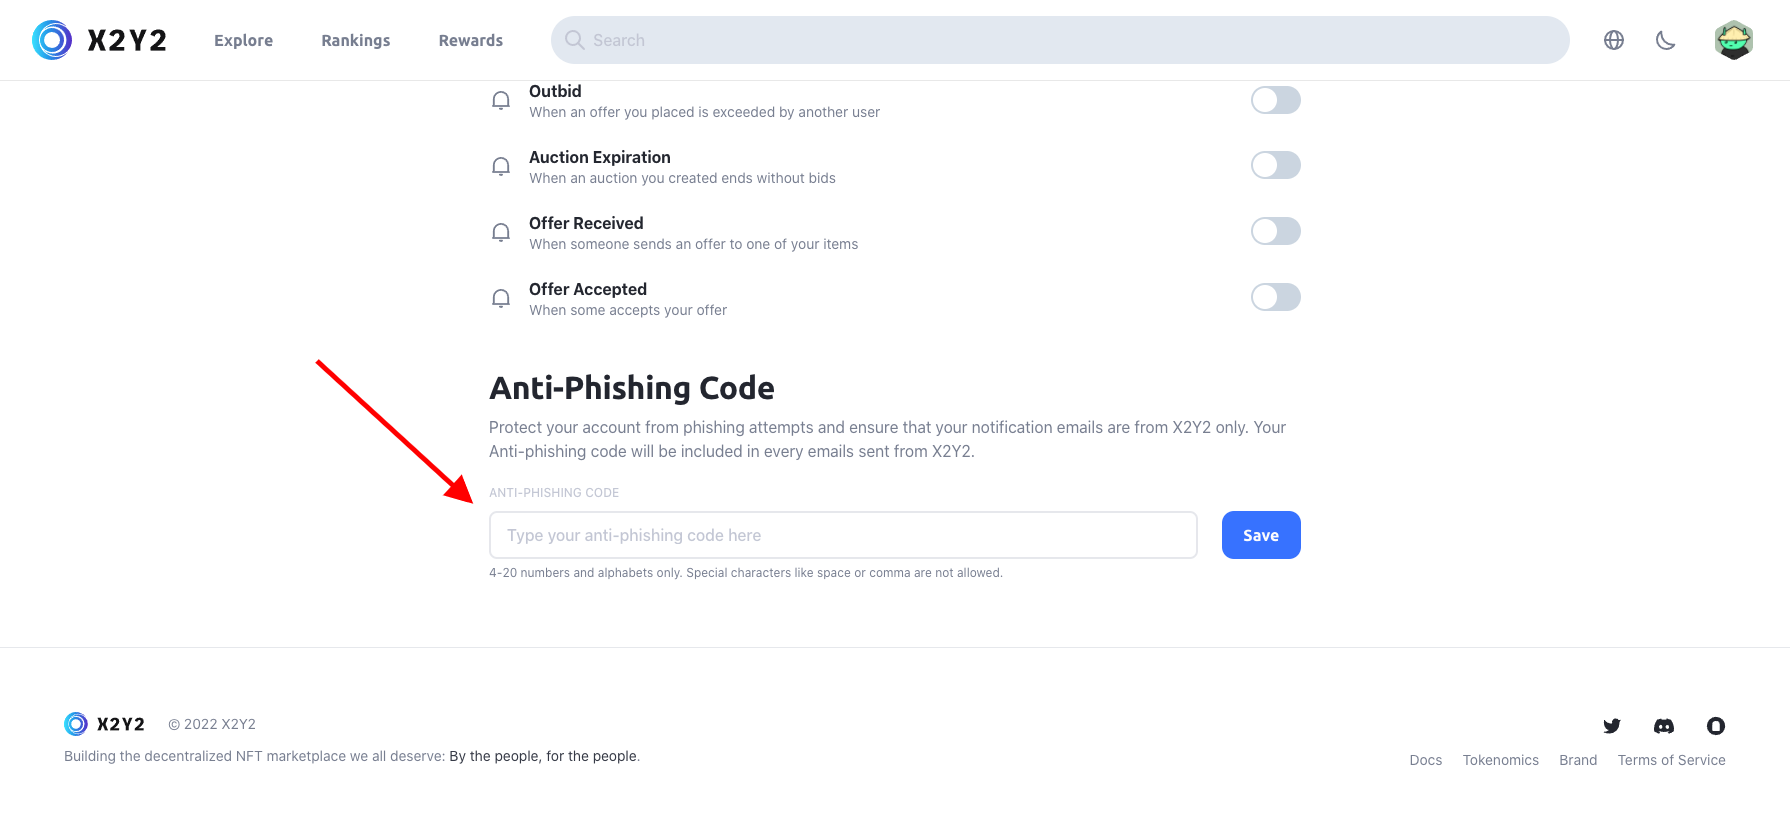 X2Y2 NFT marketplaces added anti-phishing protection after the incident with OpenSea